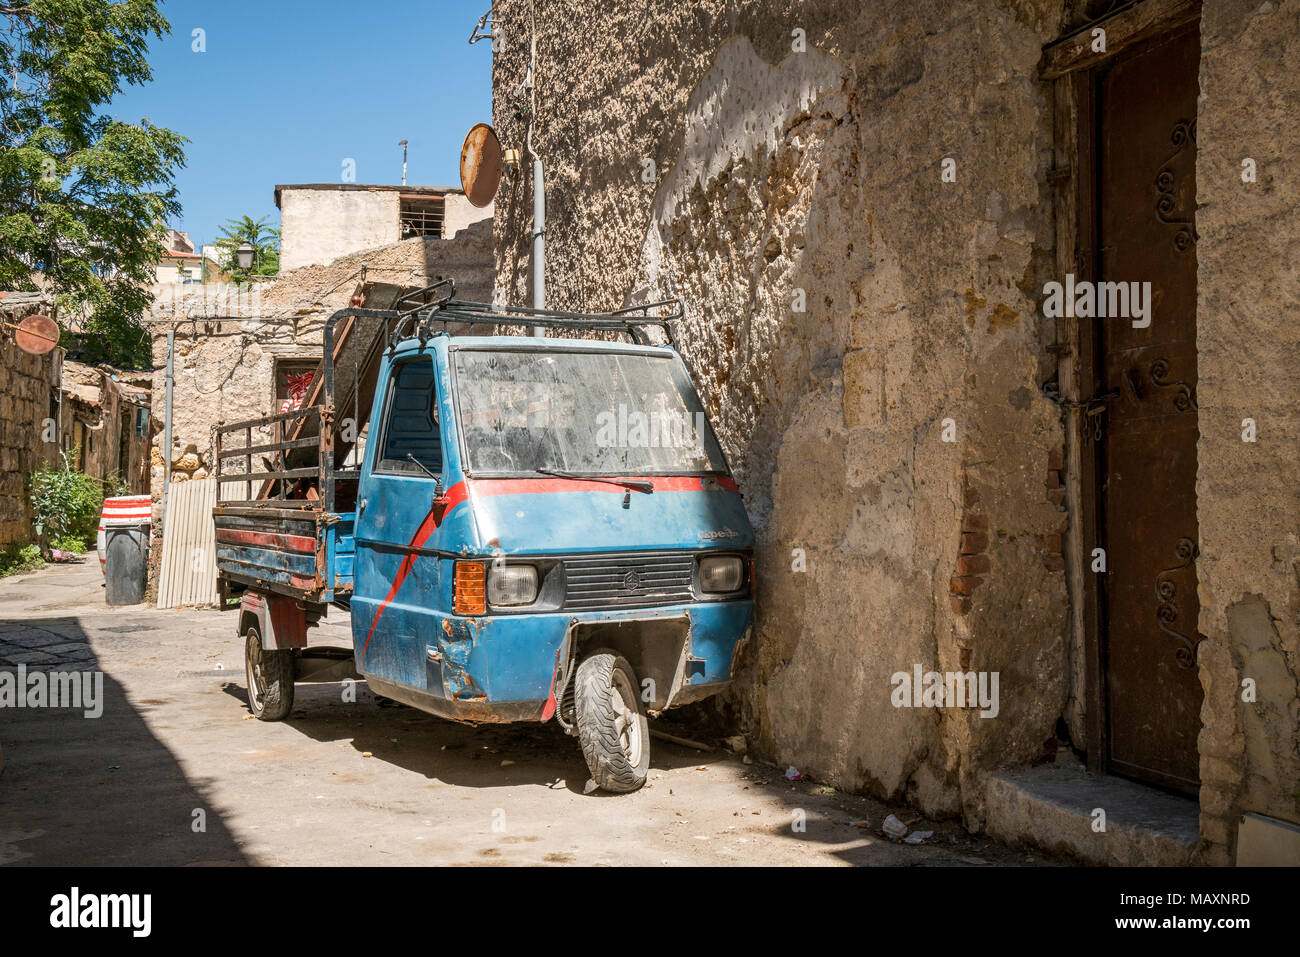 An old blue Piaggio Ape with dirty windscreen and missing it's wiper blade, parked on the streets of Palermo in Sicily, Italy. Stock Photo